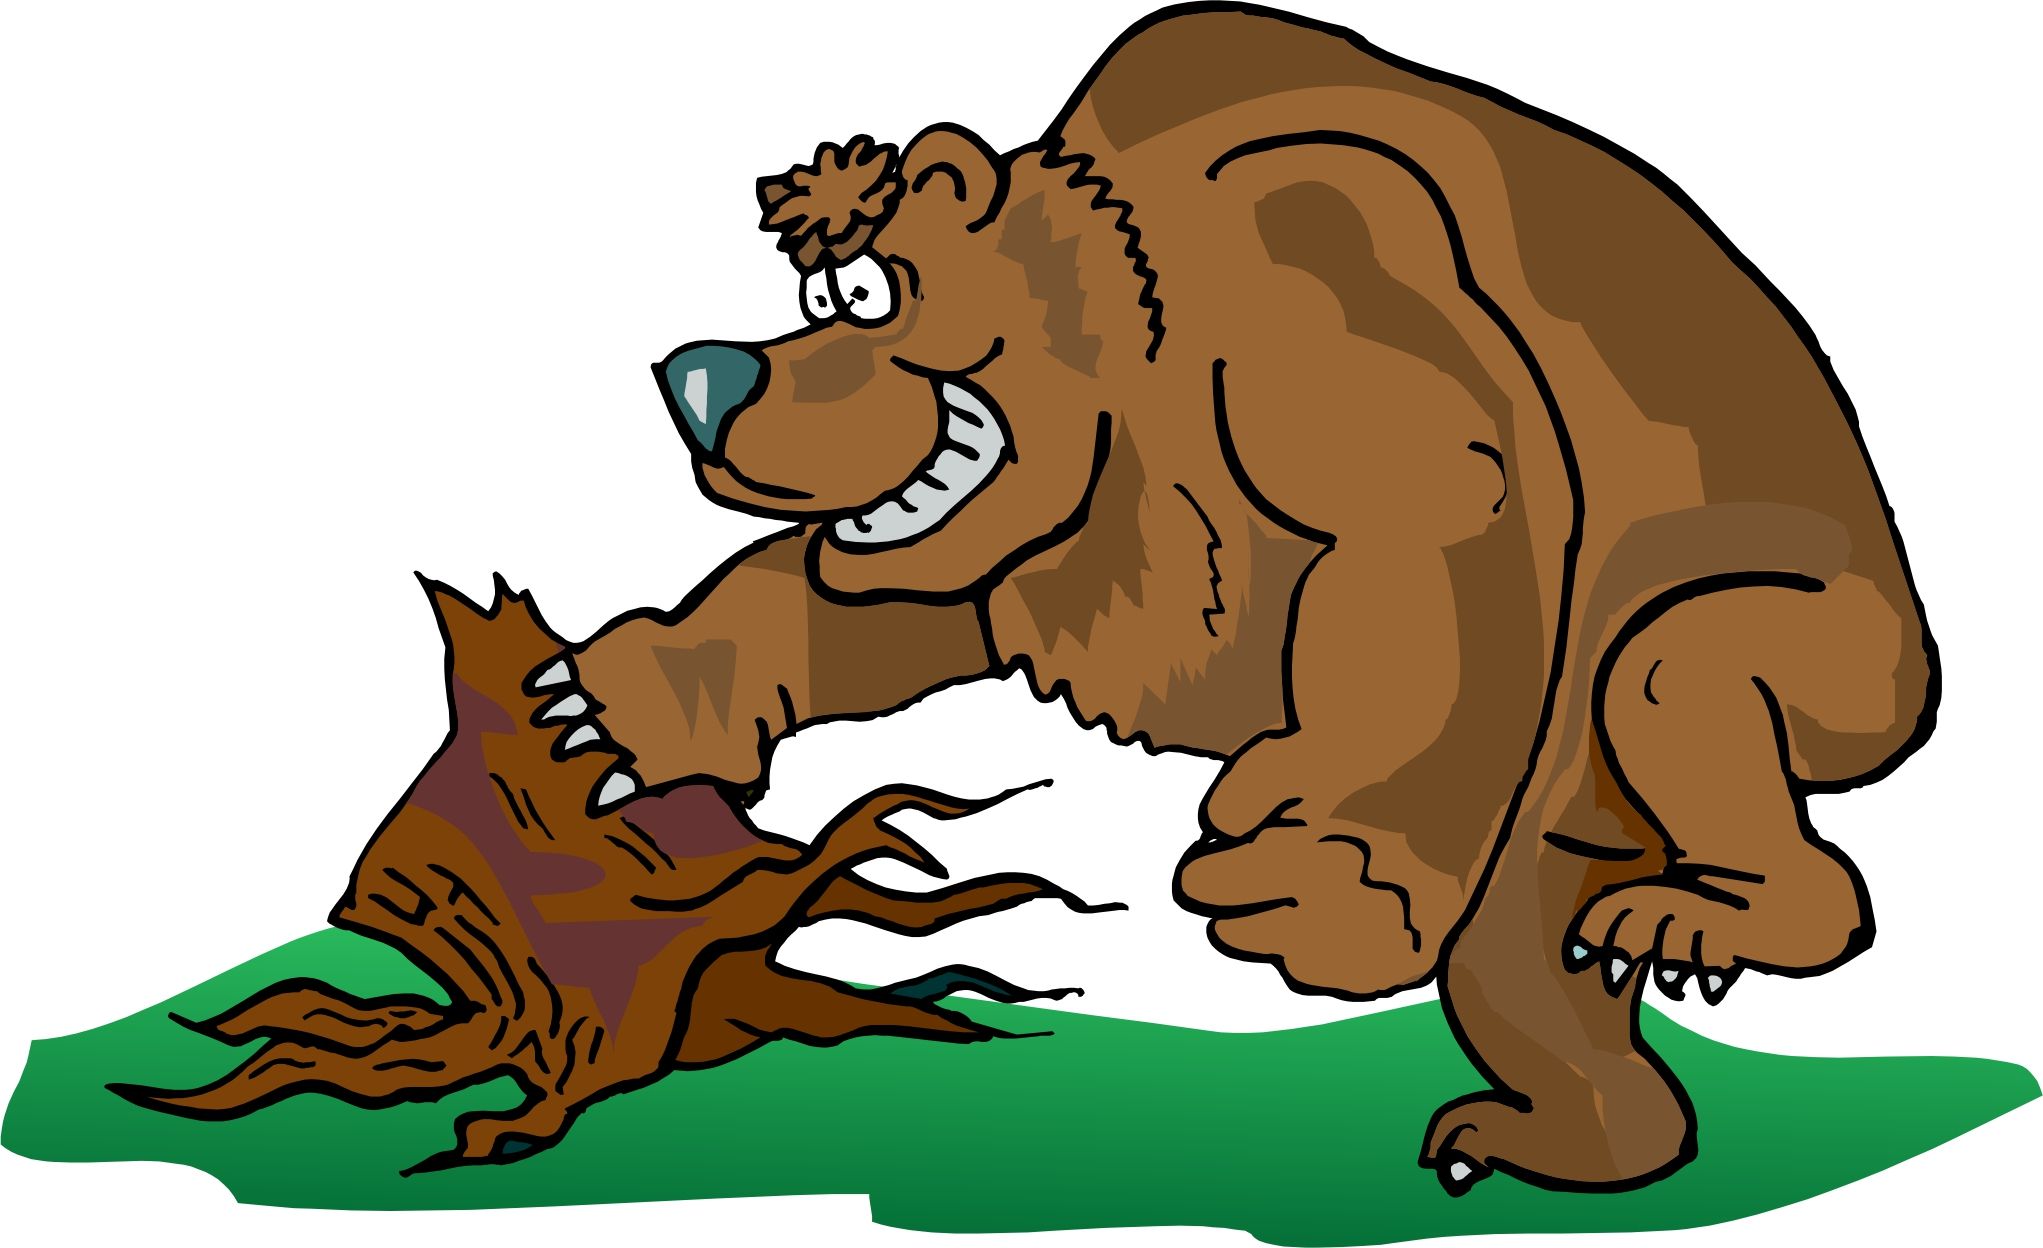 grizzly angry bear cartoon